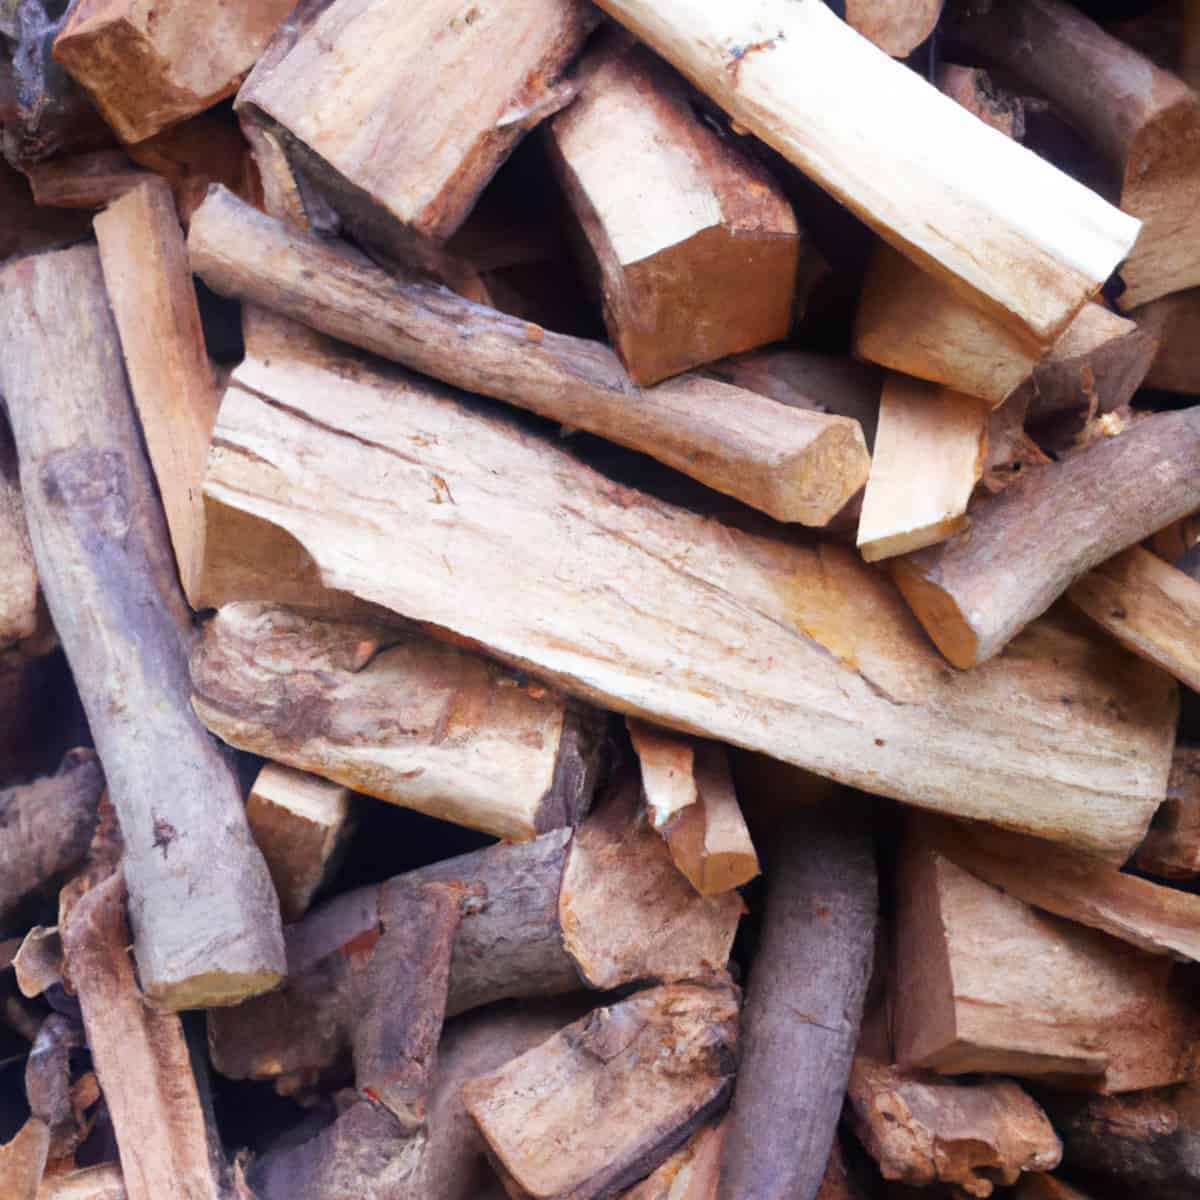 Plum (Prunus) Wood- Its Role in Smoking Meat & How to Use it